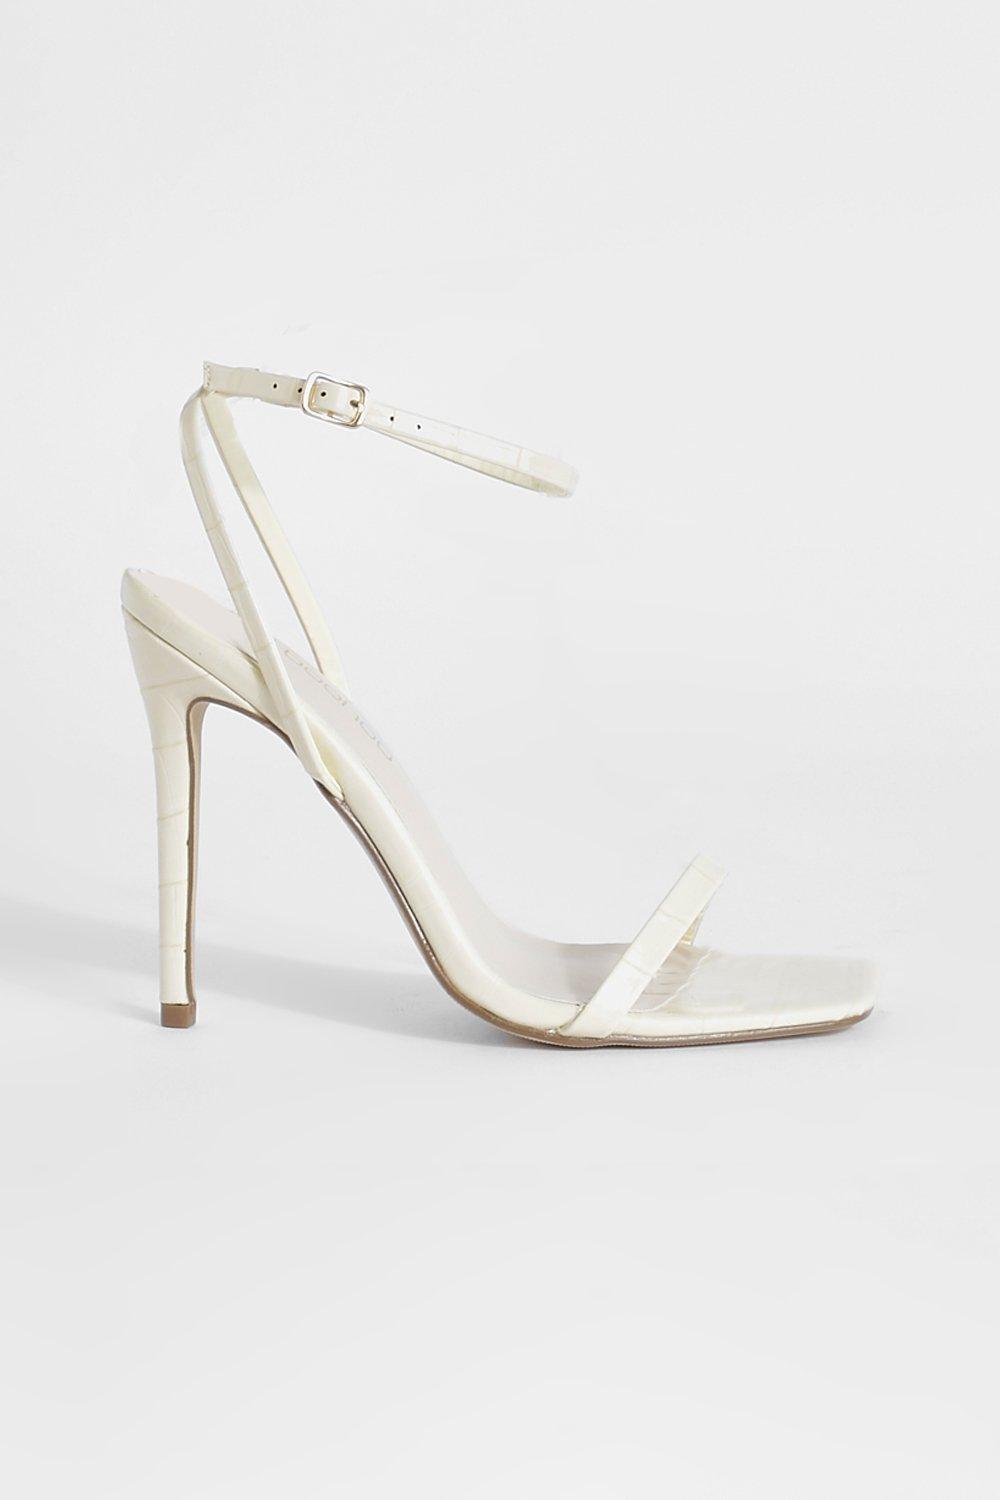 Barely There Stiletto Heels